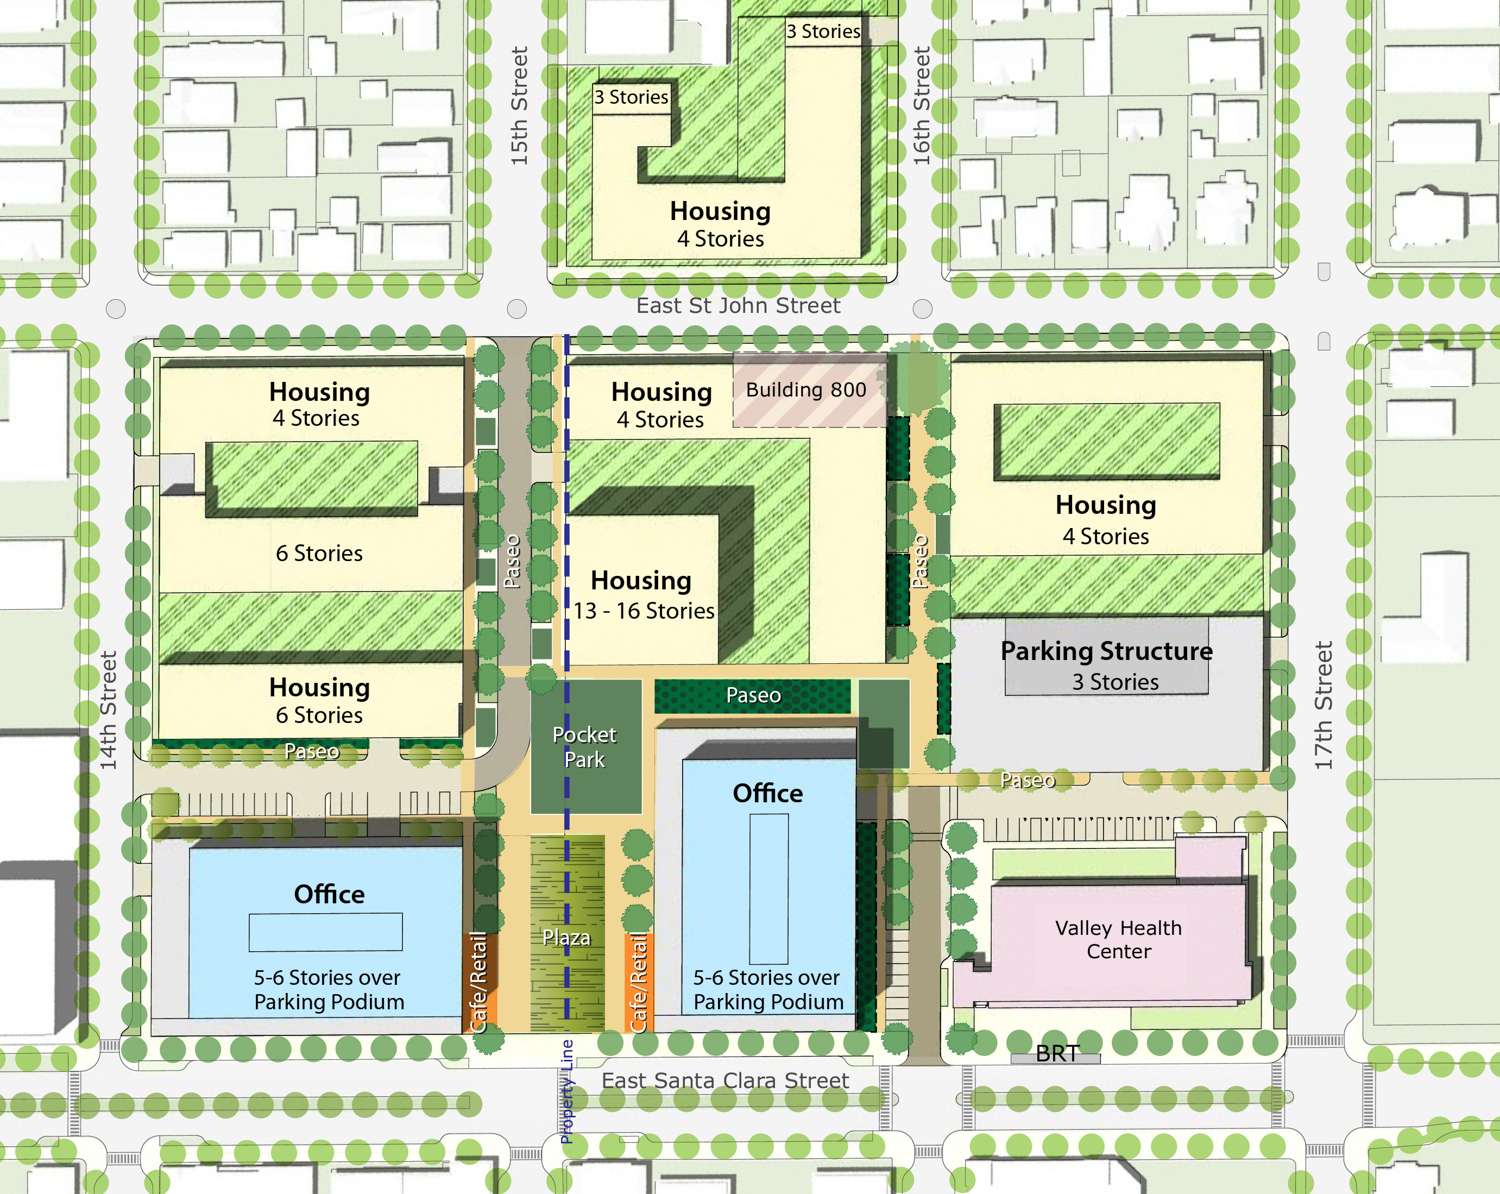 East Santa Clara Street Project master plan, illustration by the County Housing Authority